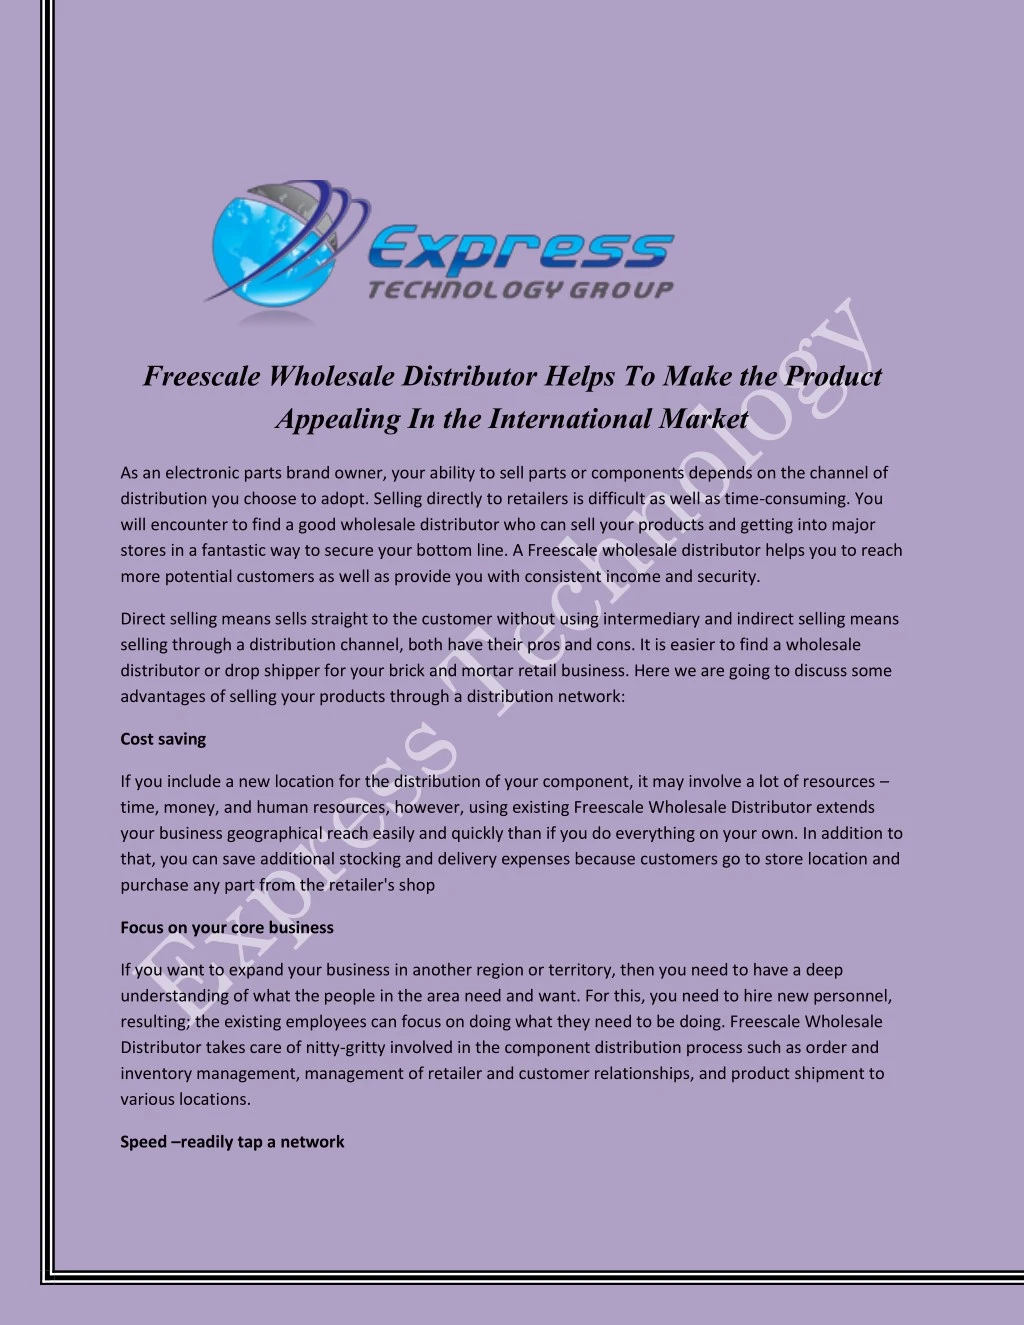 freescale wholesale distributor helps to make